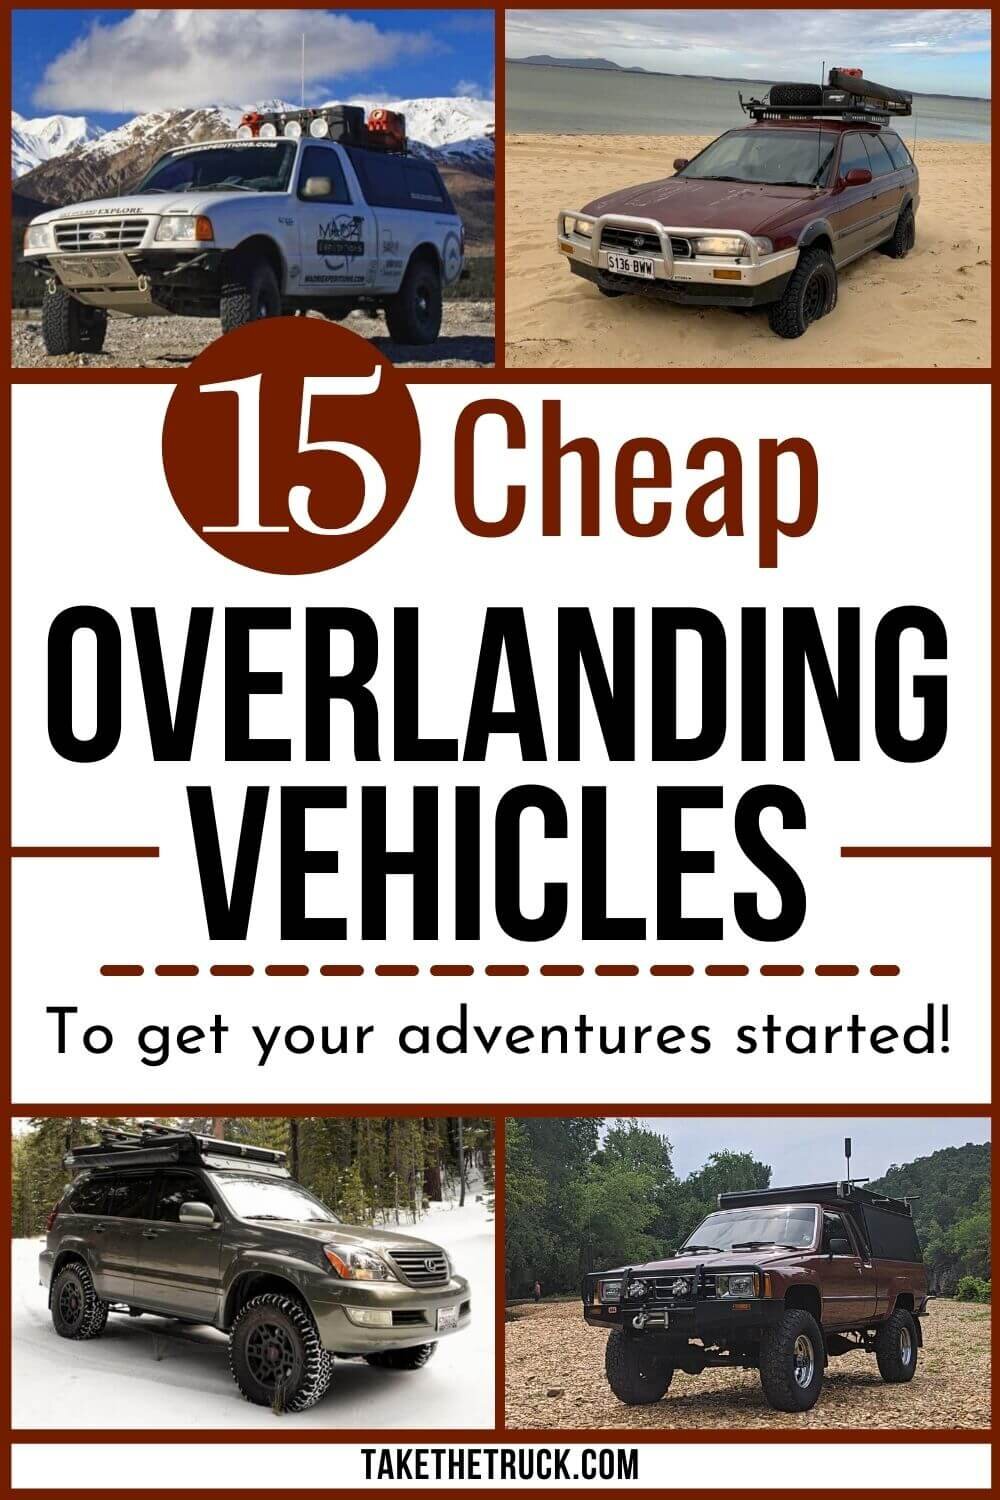 15 budget overland vehicle options if you’re overlanding on a budget. Cheap overland vehicles with great budget overland build ideas to help you start your overlanding adventures today!